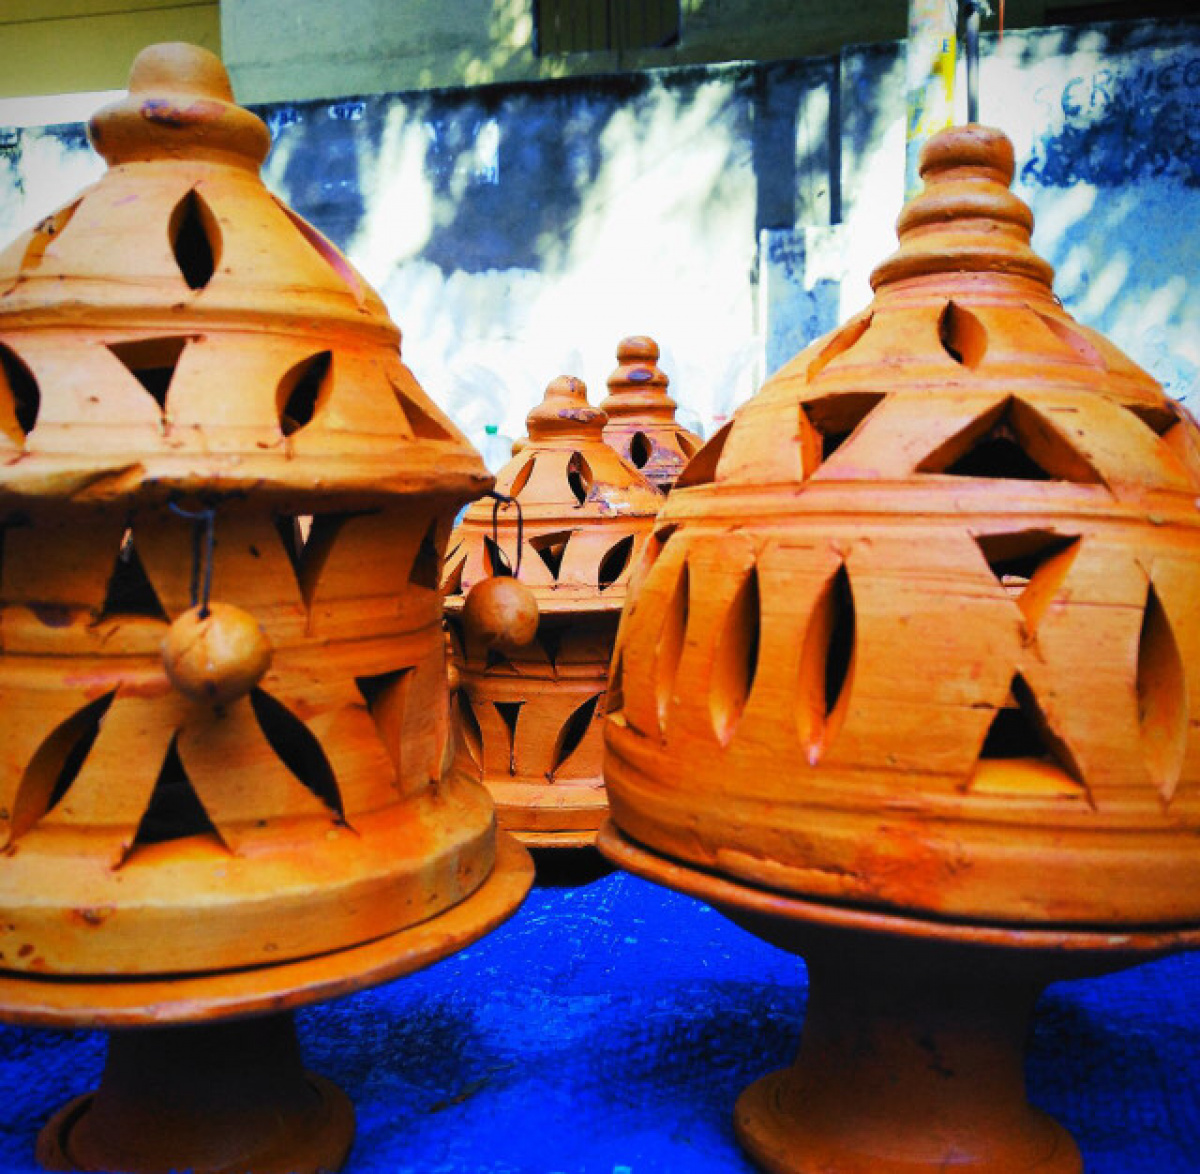 Hyderabadi oil lamps used during Diwali (Shared by Hrishikesh Ingle in 2019).